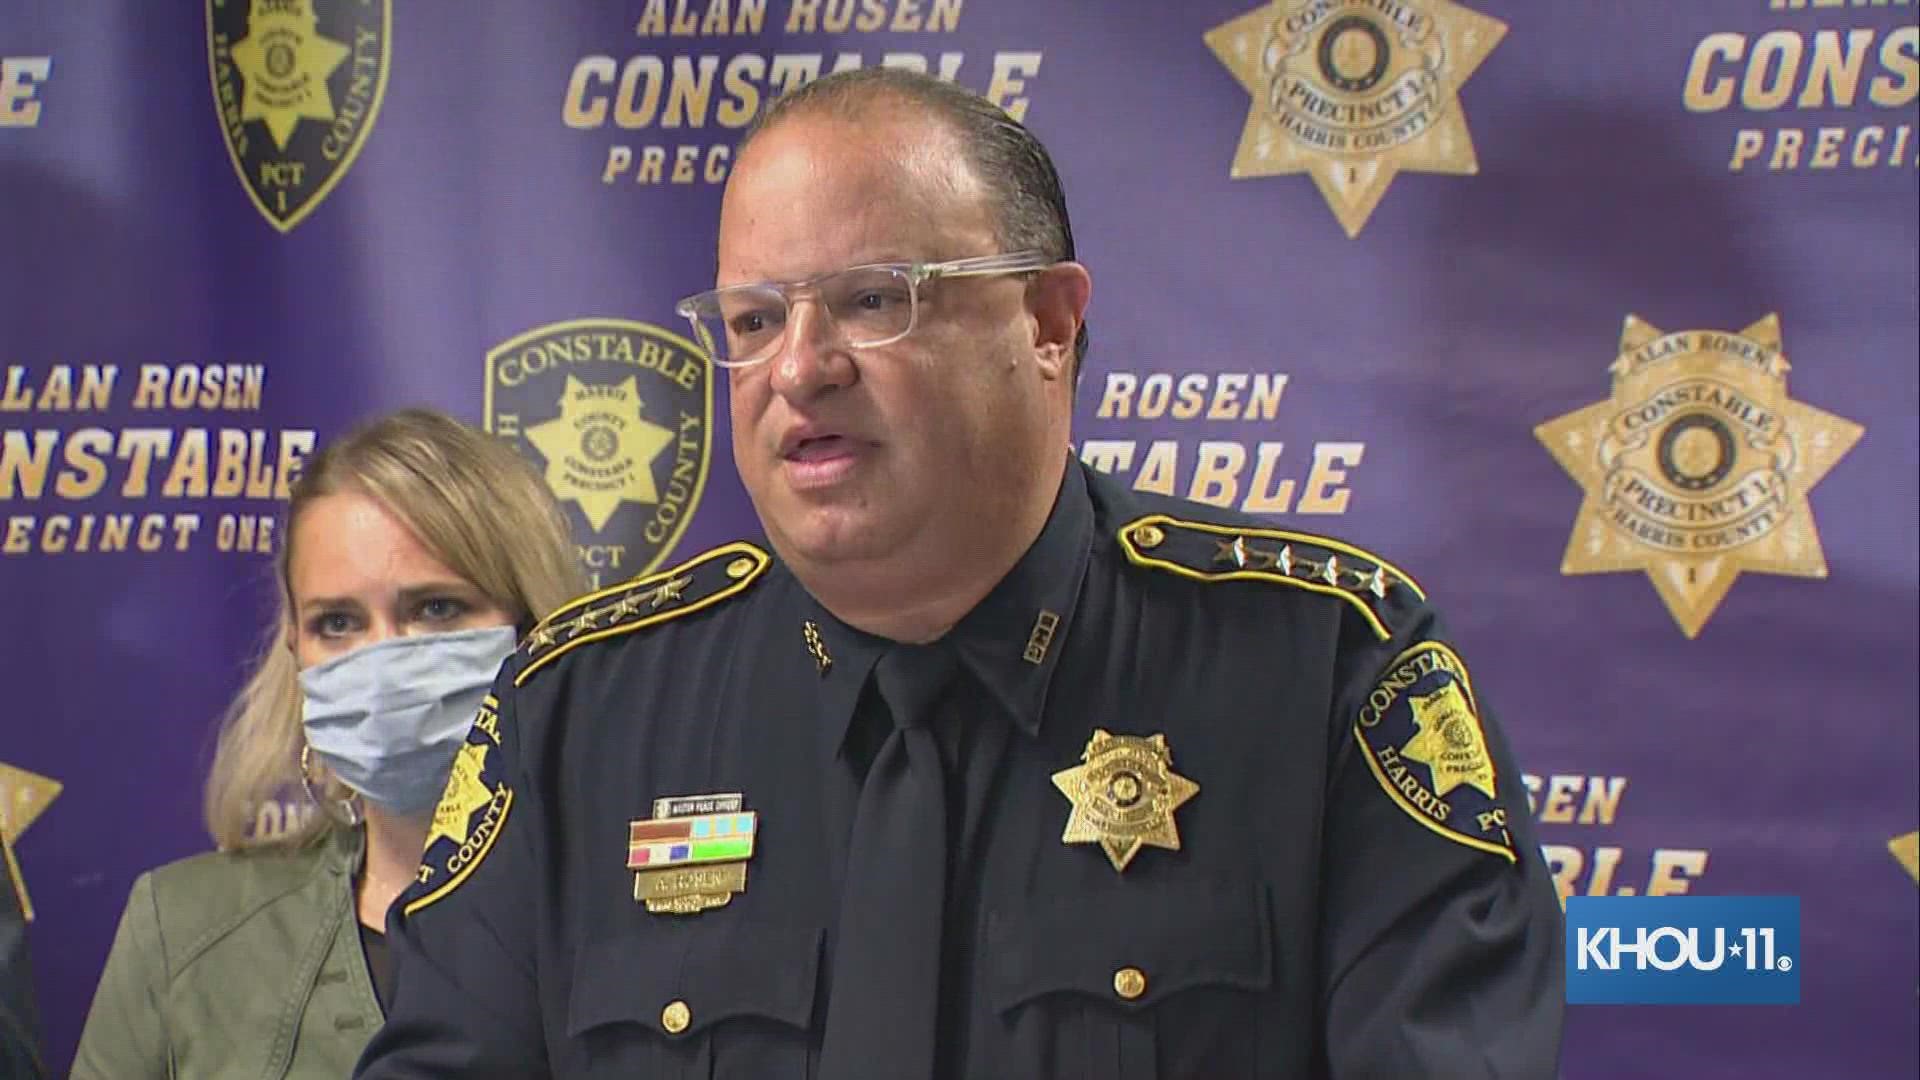 Harris County Pct. 1 Constable Alan Rosen have an update on the deputy who was severely injured during a chase Wednesday night.